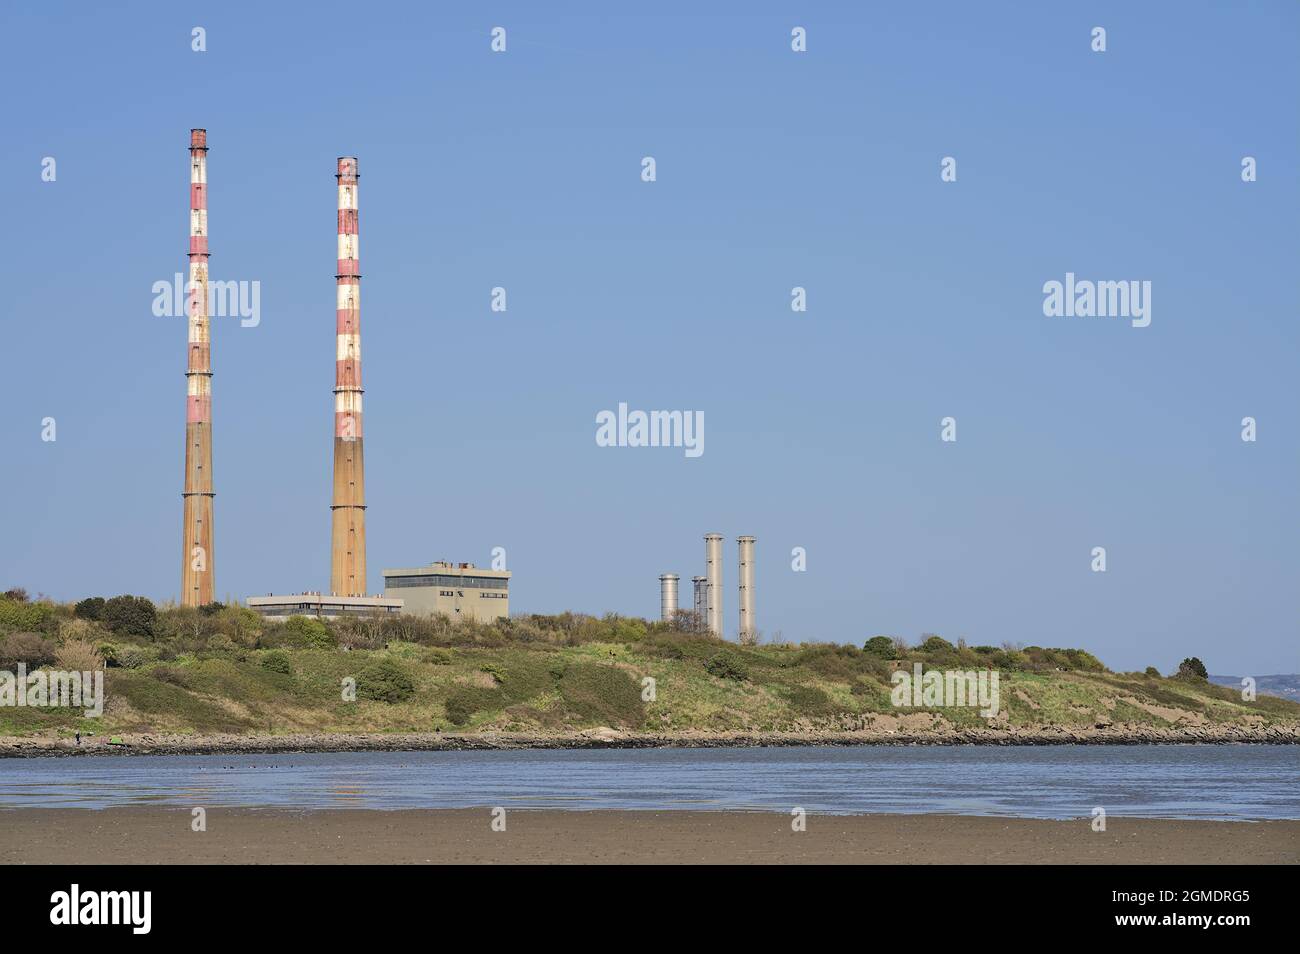 Closeup bright view of iconic Poolbeg power station chimneys and Poolbeg CCGT station against clear blue sky seen from Sandymount Beach, Dublin Stock Photo